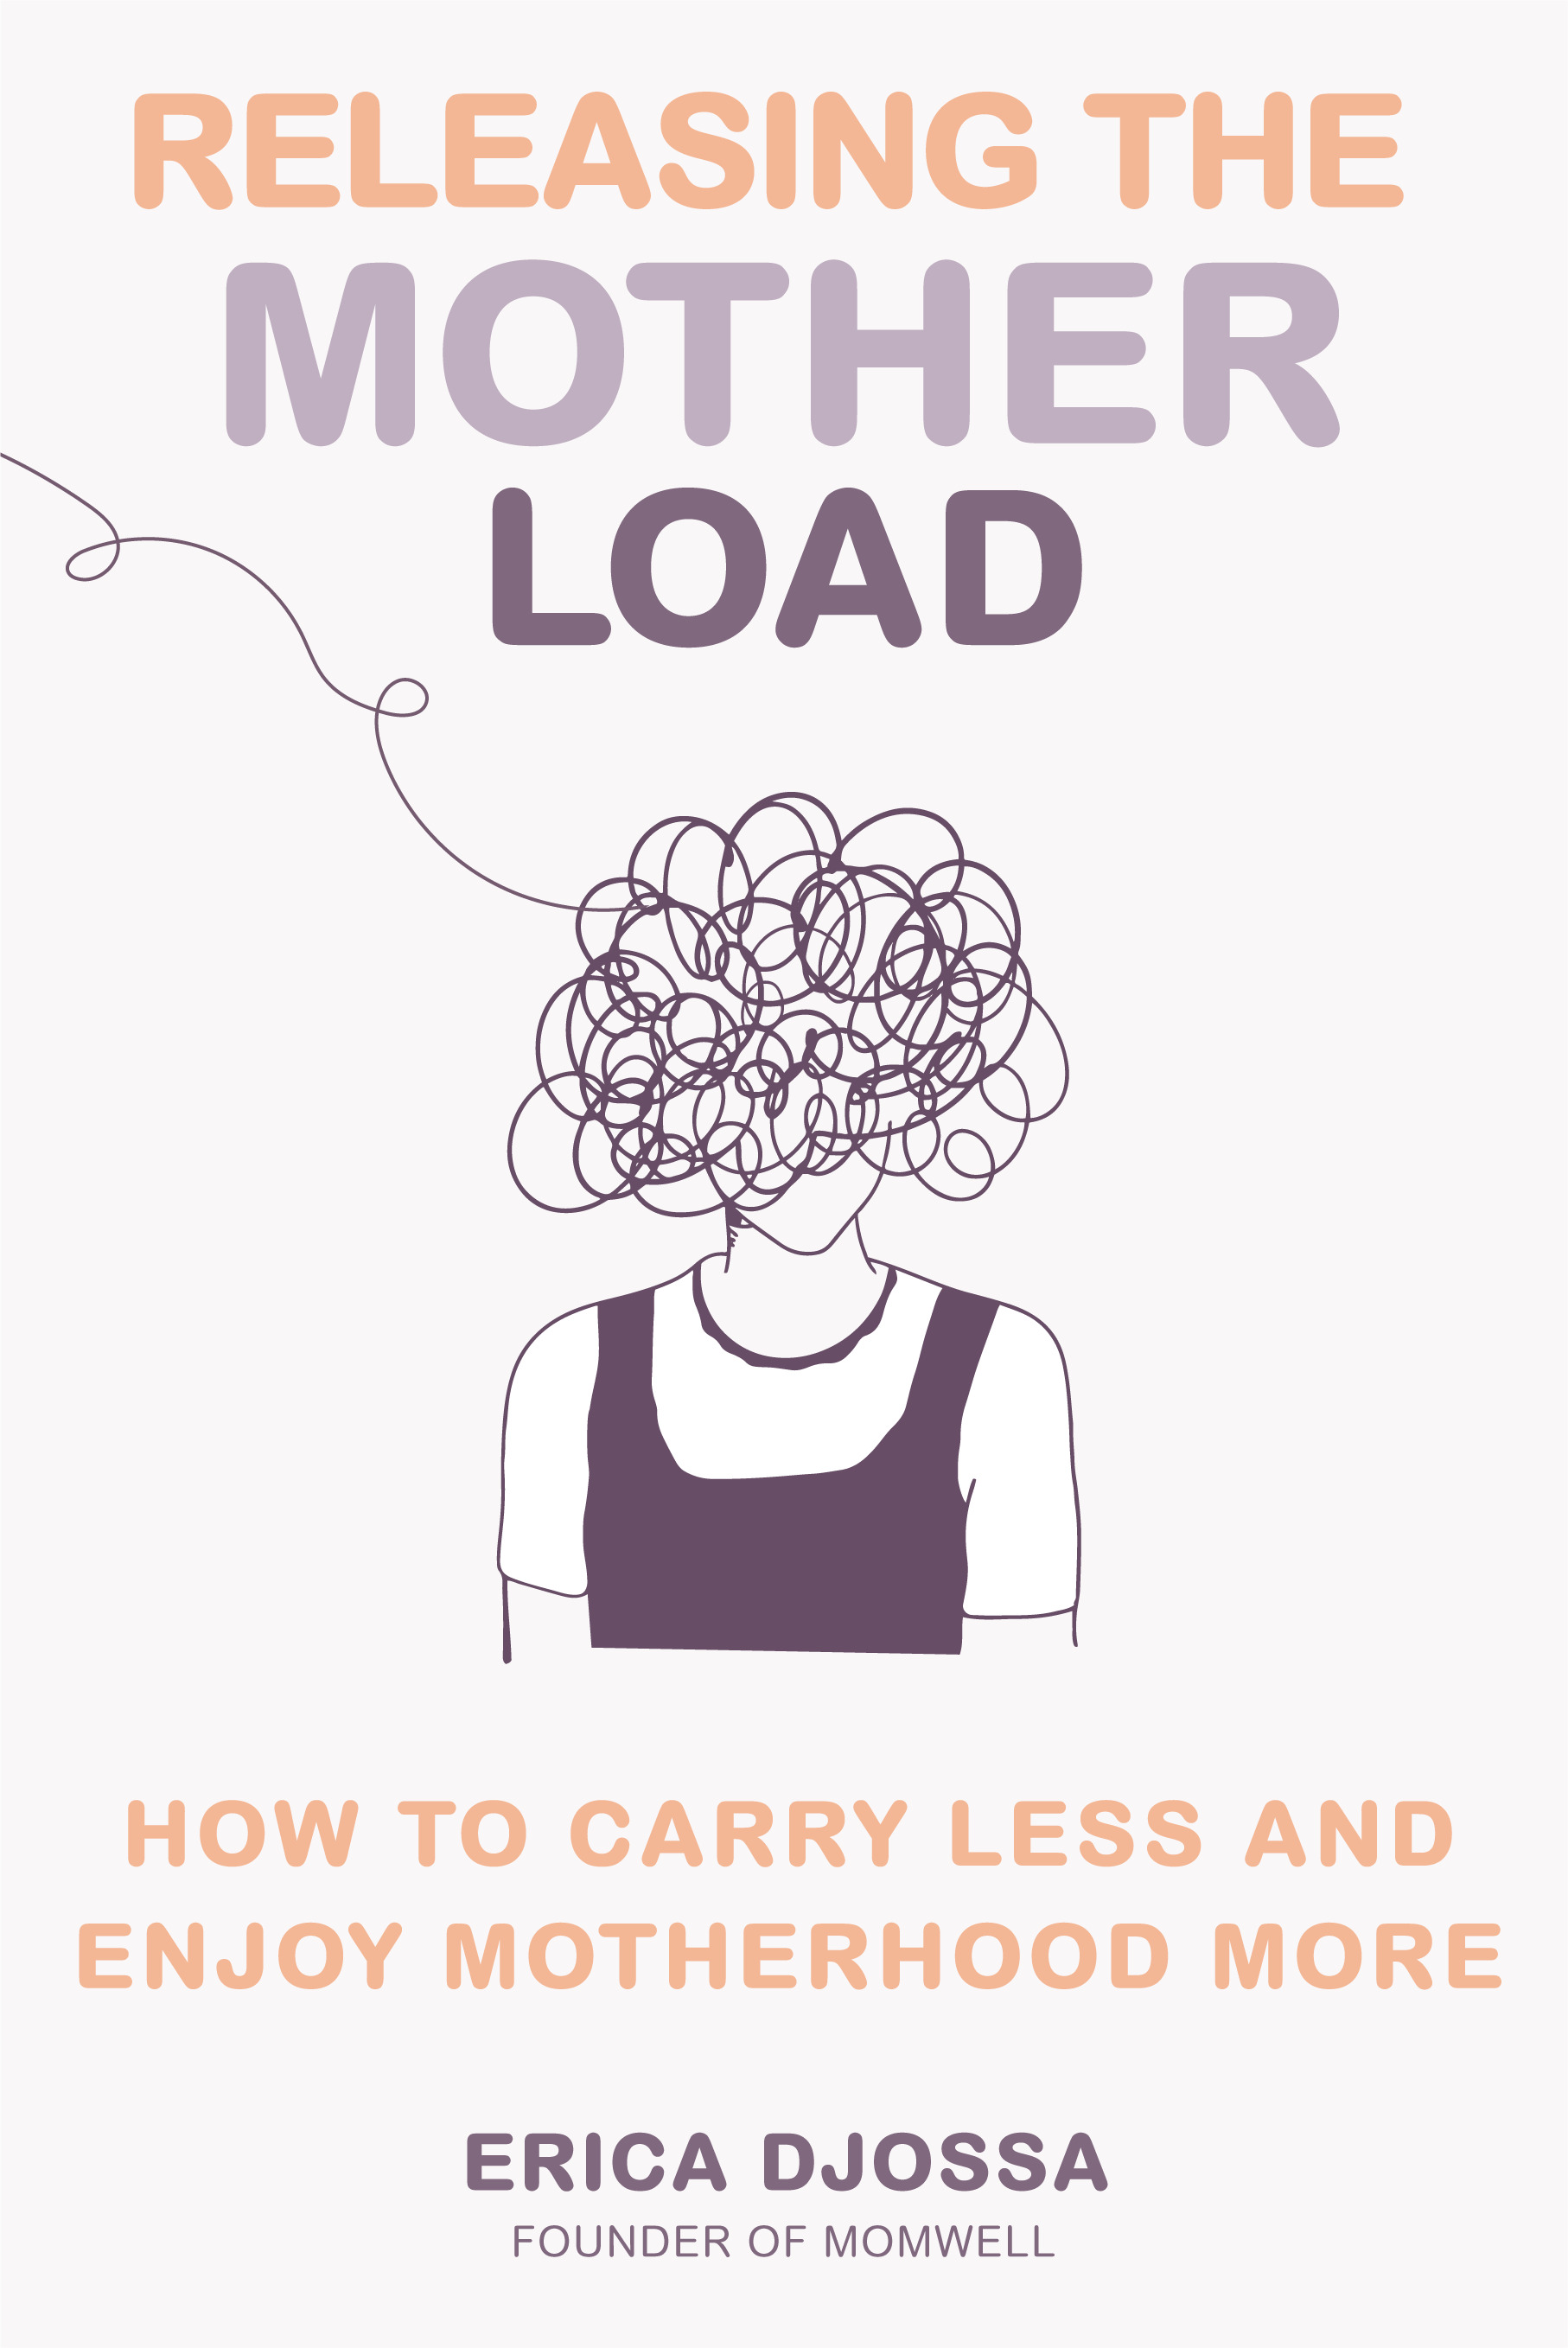 RELEASING THE MOTHER LOAD: HOW TO CARRY LESS AND ENJOY MOTHERHOOD MORE, by DJOSSA, ERICA